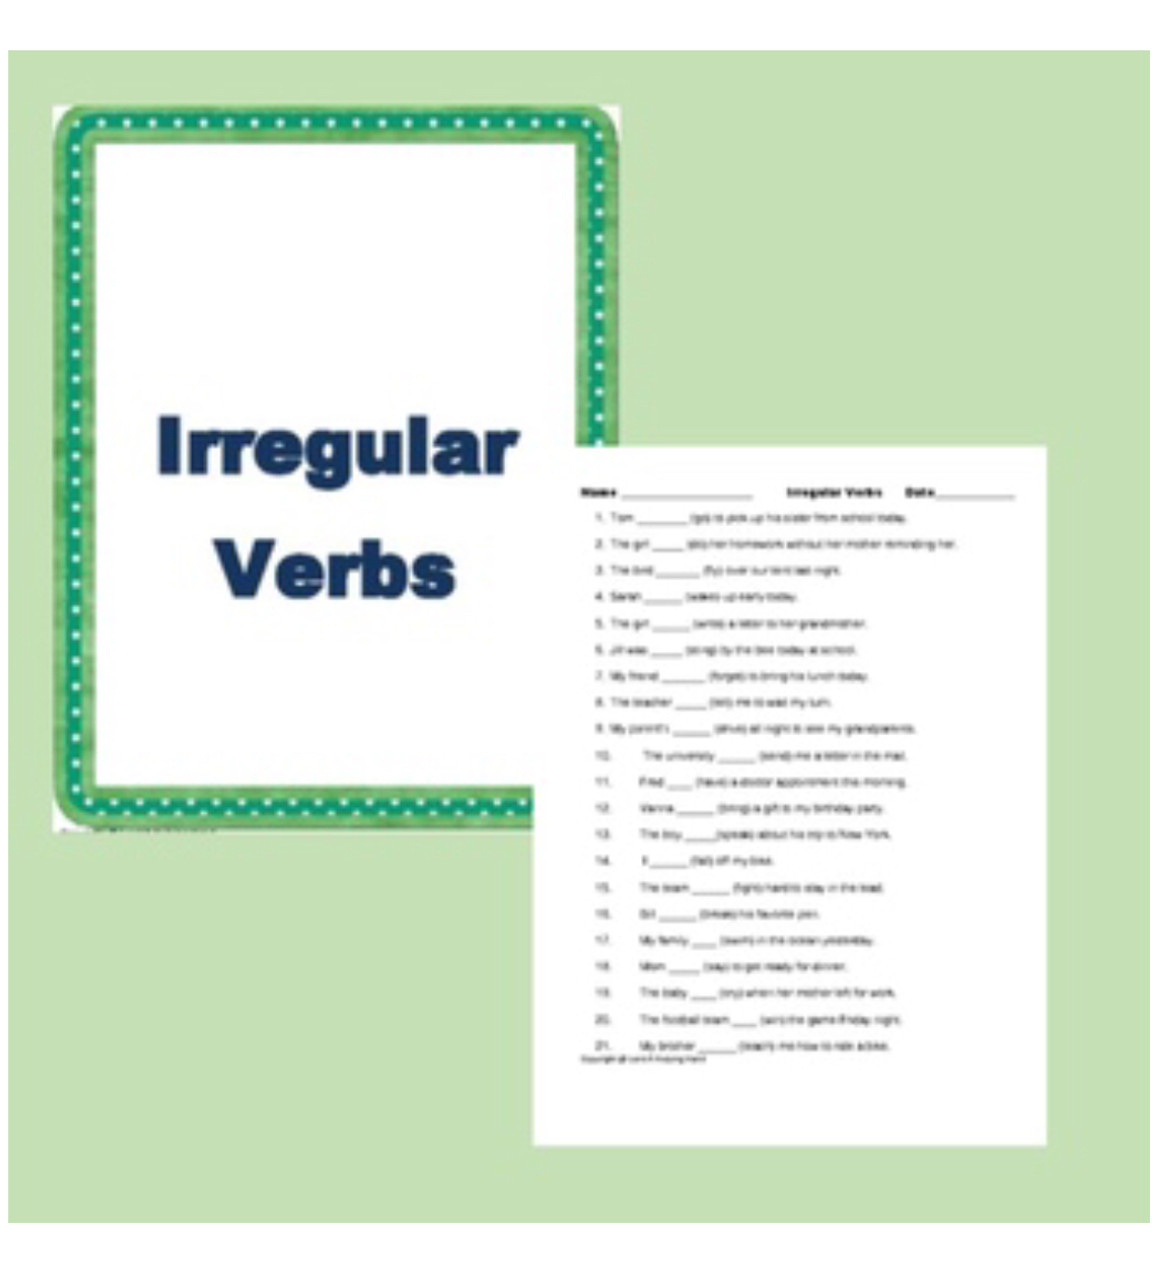 Irregular Verbs - 5 Activities to Support Teaching (Dominoes, Bingo Game,  Flash Cards, Cloze Procedure, Loop Game) - Amped Up Learning